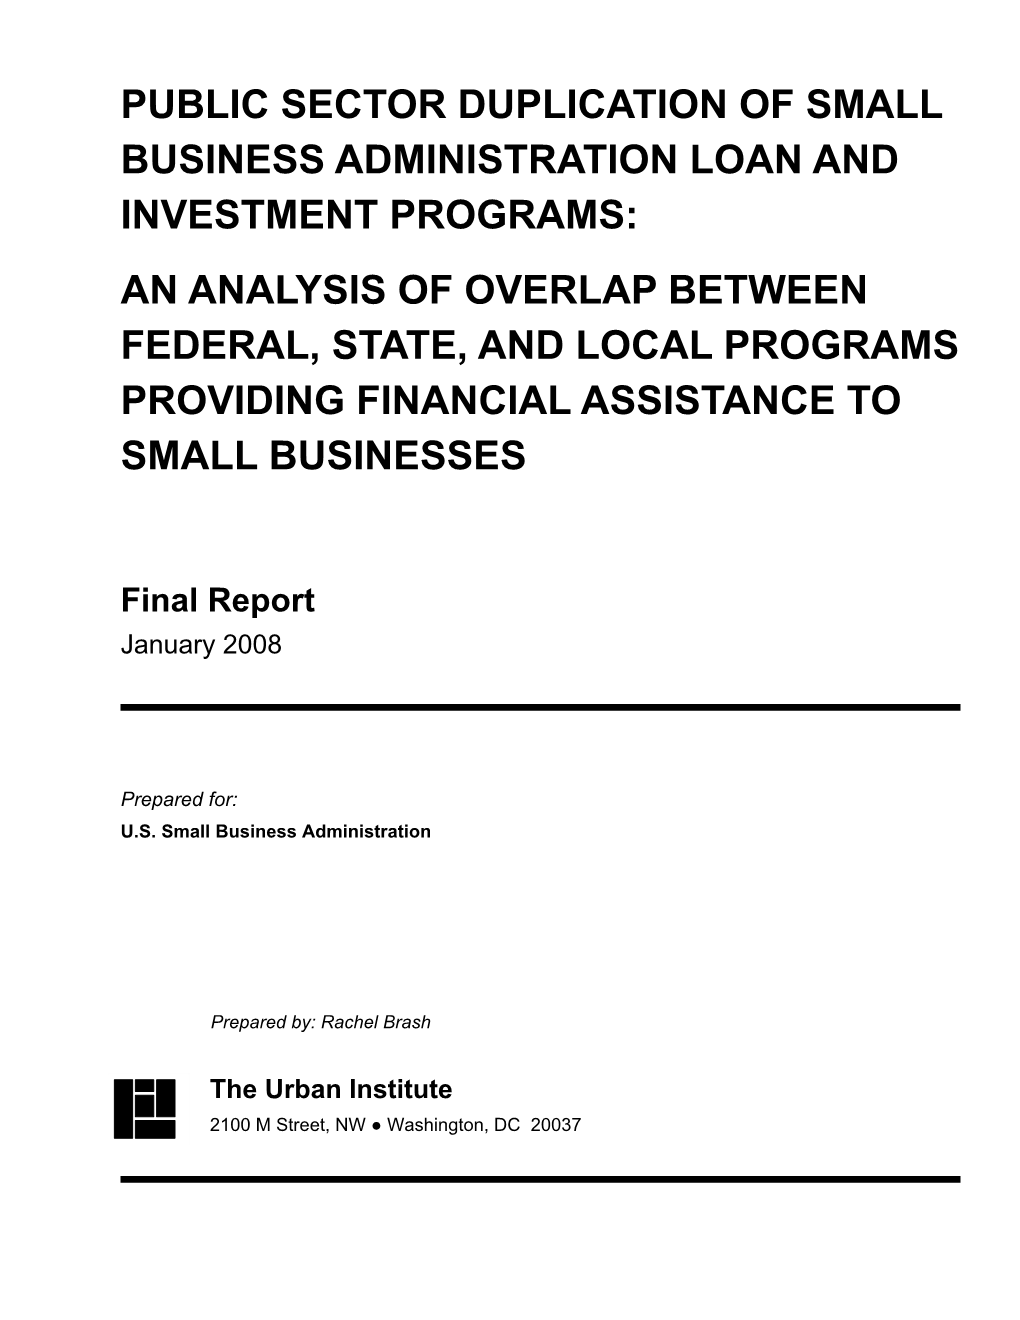 Public Sector Duplication of Small Business Administration Loan And